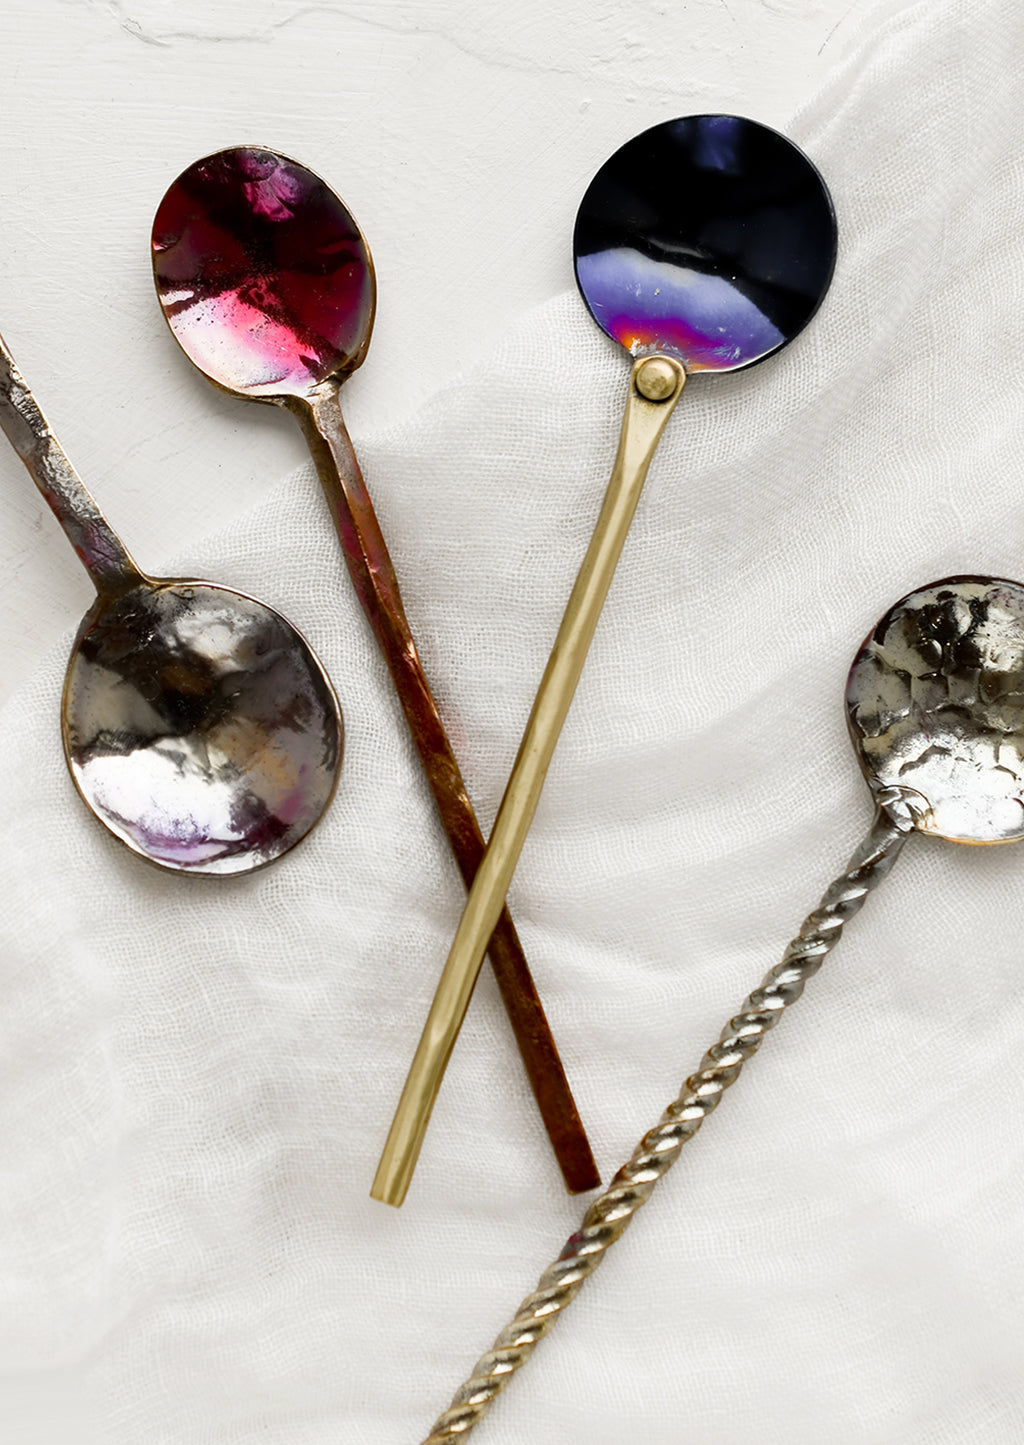 2: A variety of oxidized metal spoons in different finishes and handle types.